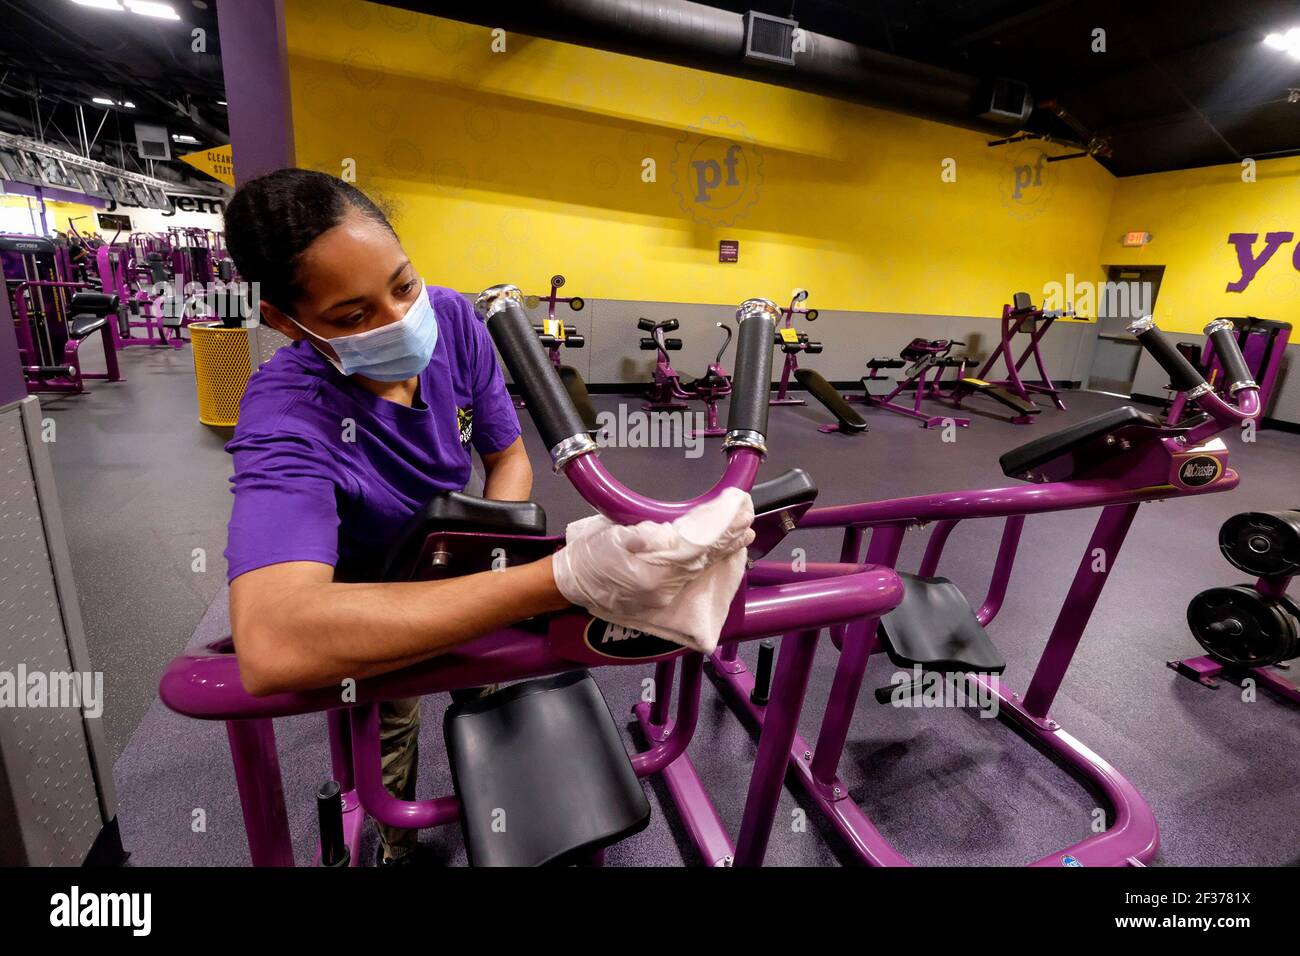 Los Angeles, California, USA. 15th Mar, 2021. A Planet Fitness staff cleans  gym equipment to prepare the reopening after being closed due to Covid-19  pandemic in Inglewood, California, on March 15, 2021.